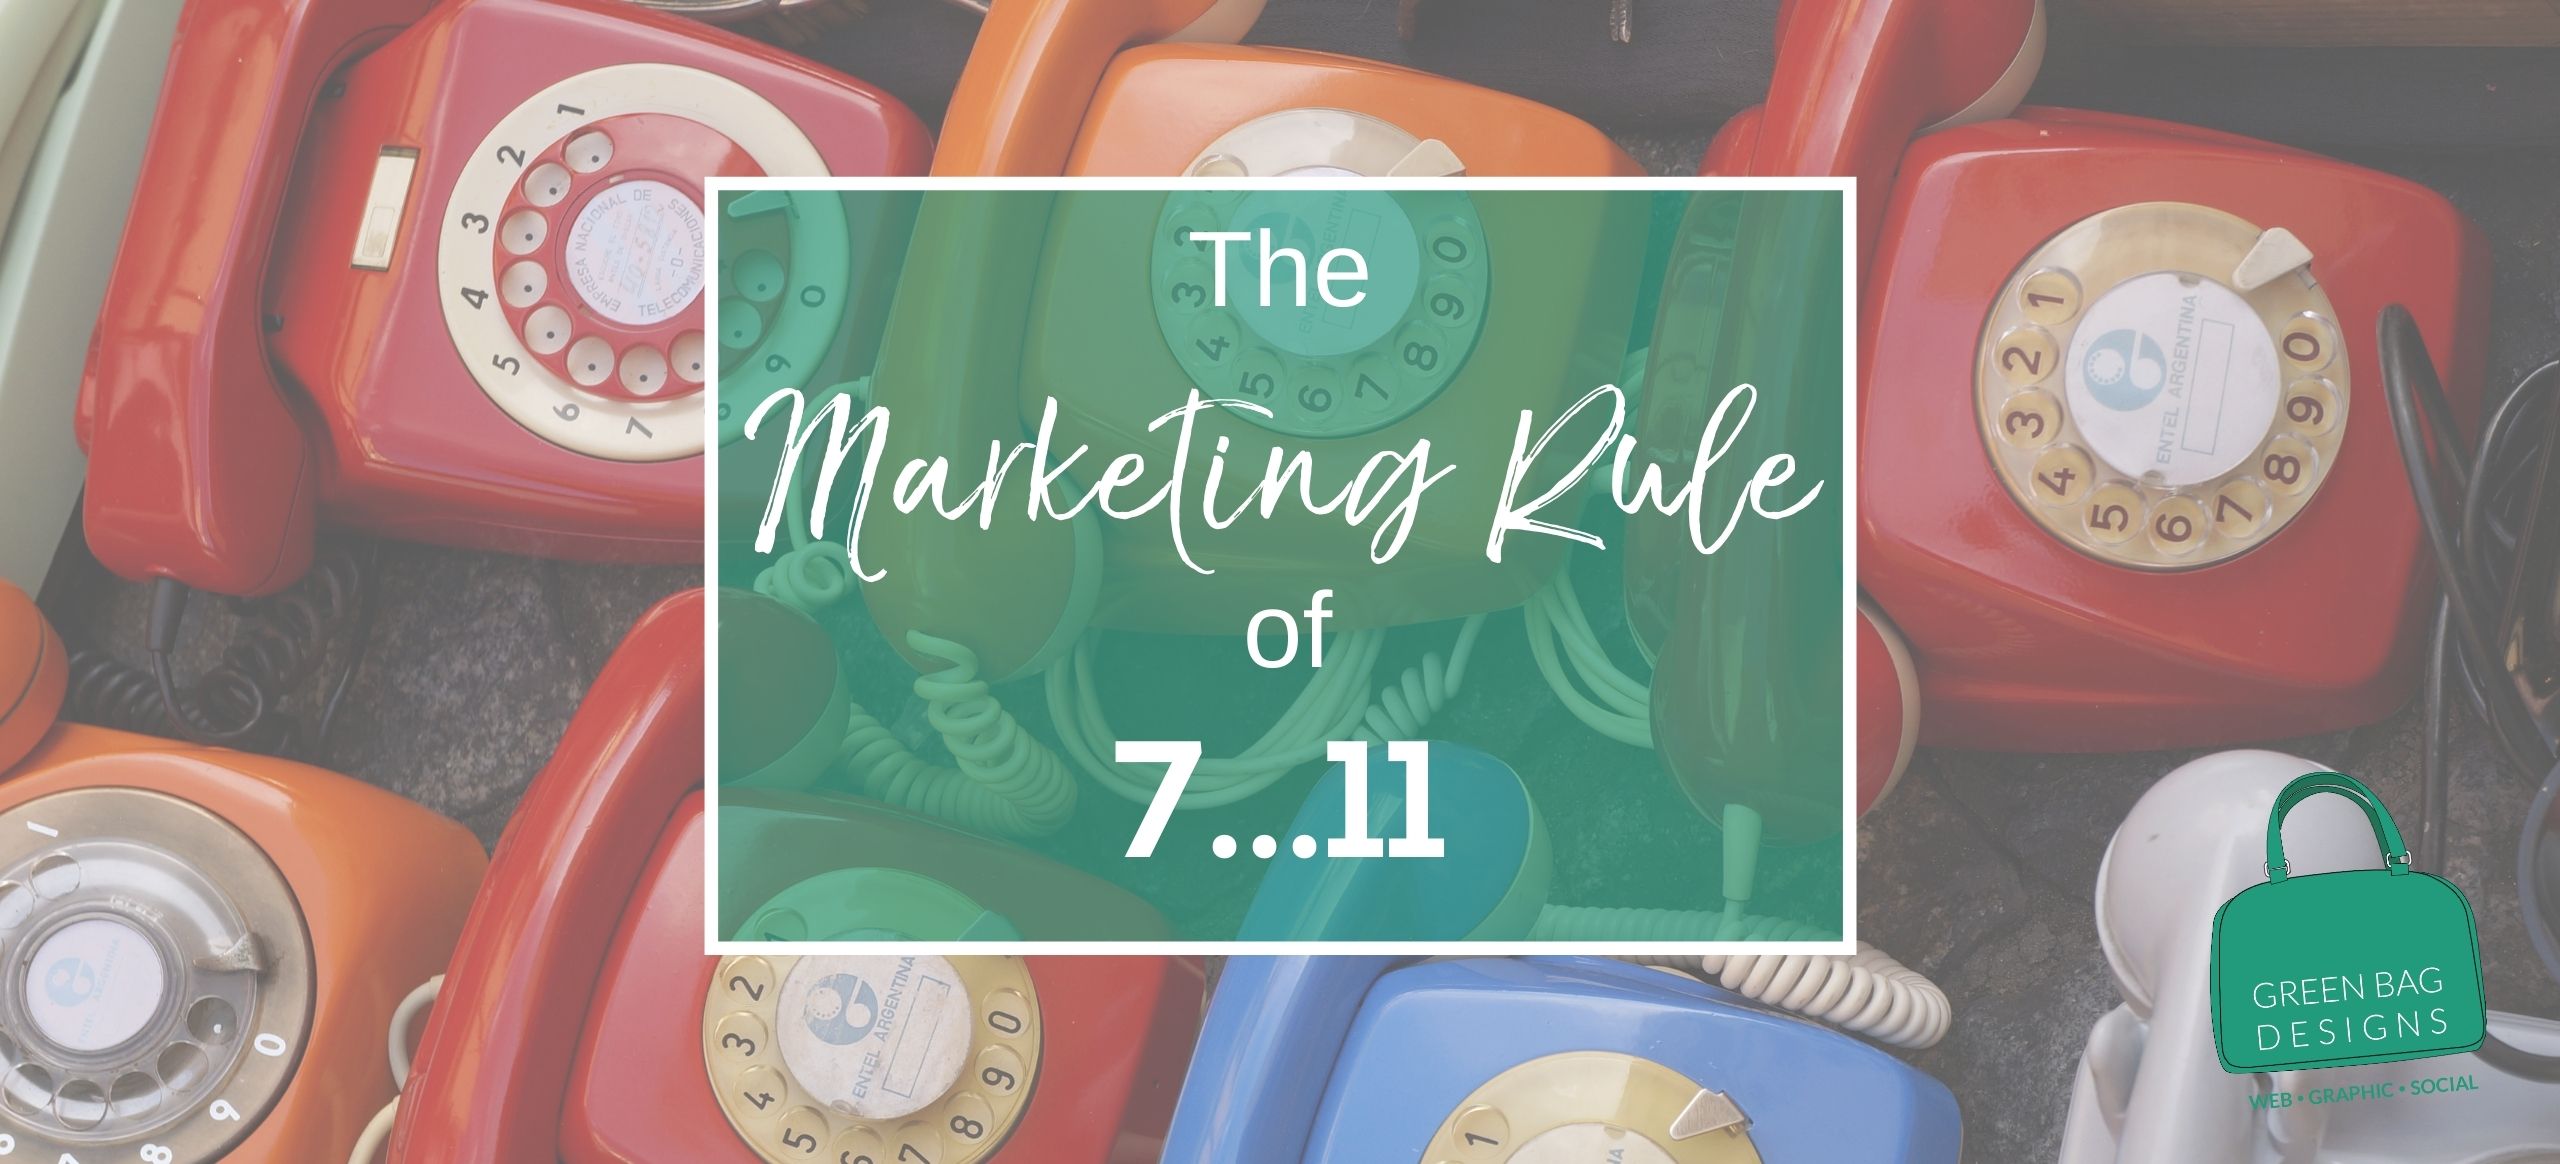 The marketing rule of 7 header image with bright rotary phones in the background